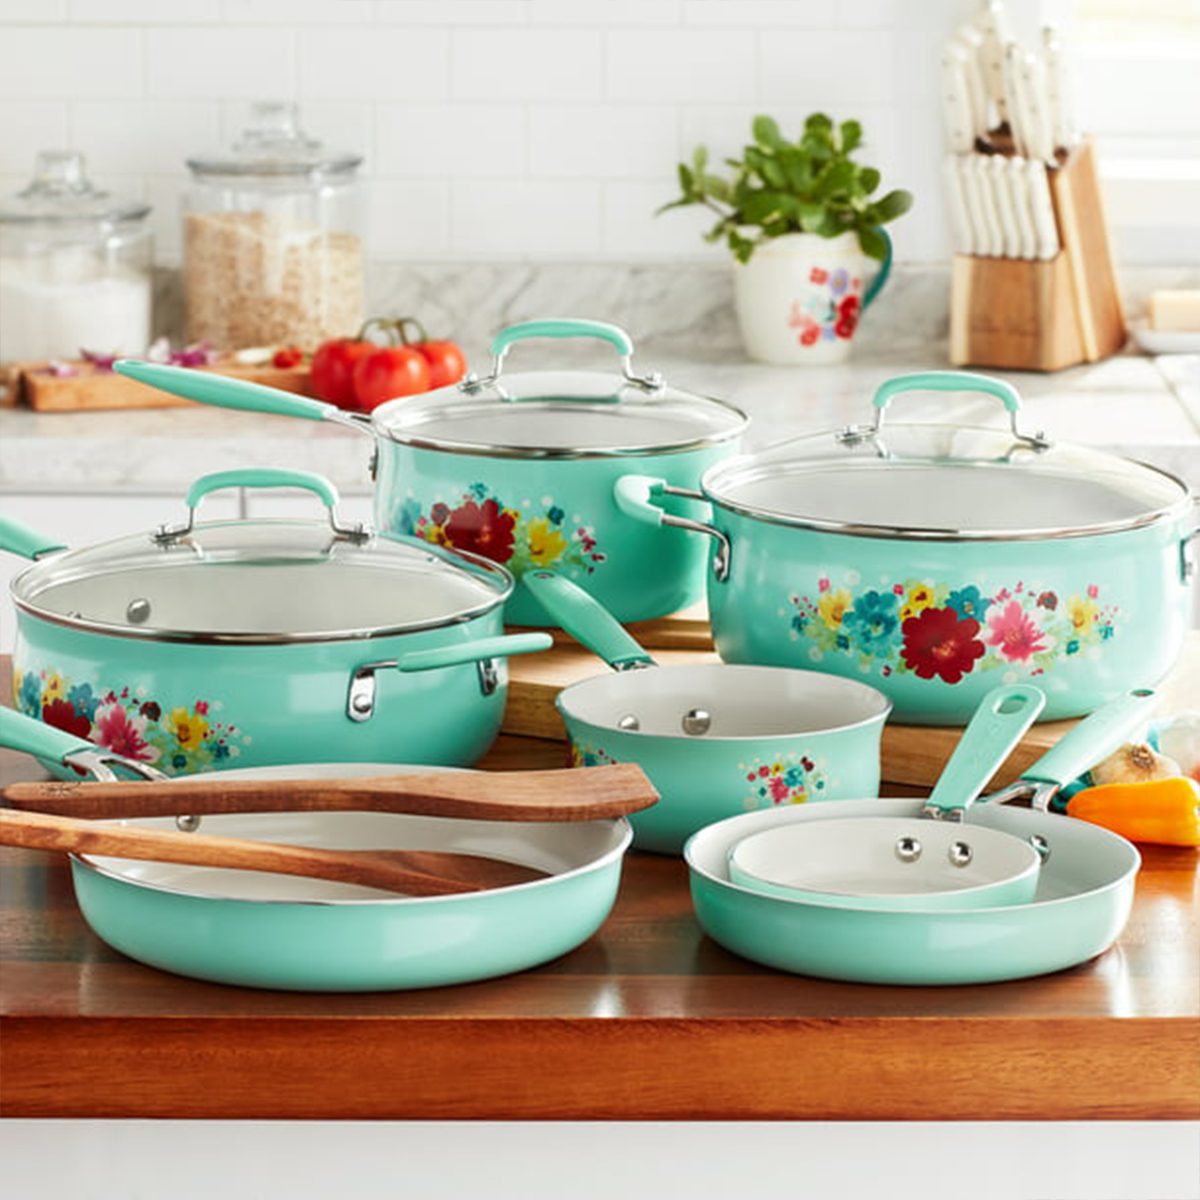 The Pioneer Woman's Kitchenwares Are On Sale